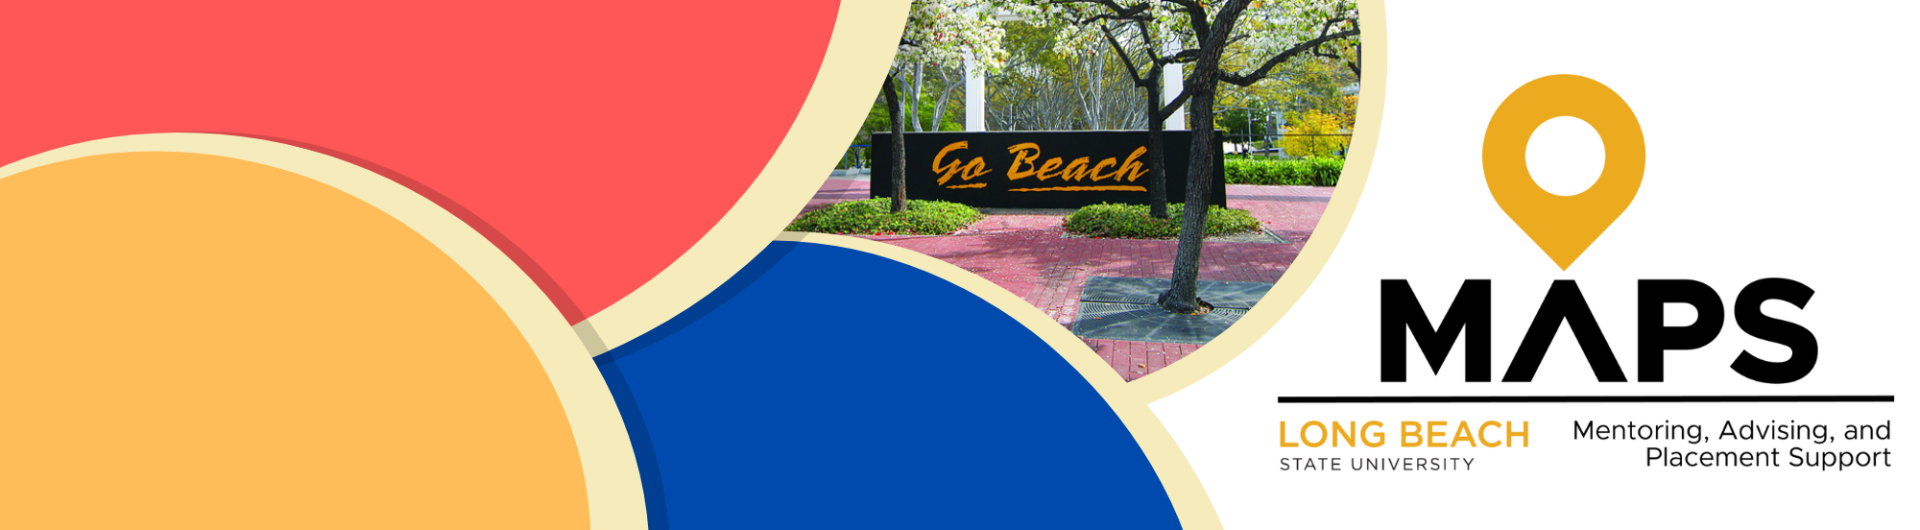 Red, yellow, blue circles, with Go Beach photo image and MAPS logo